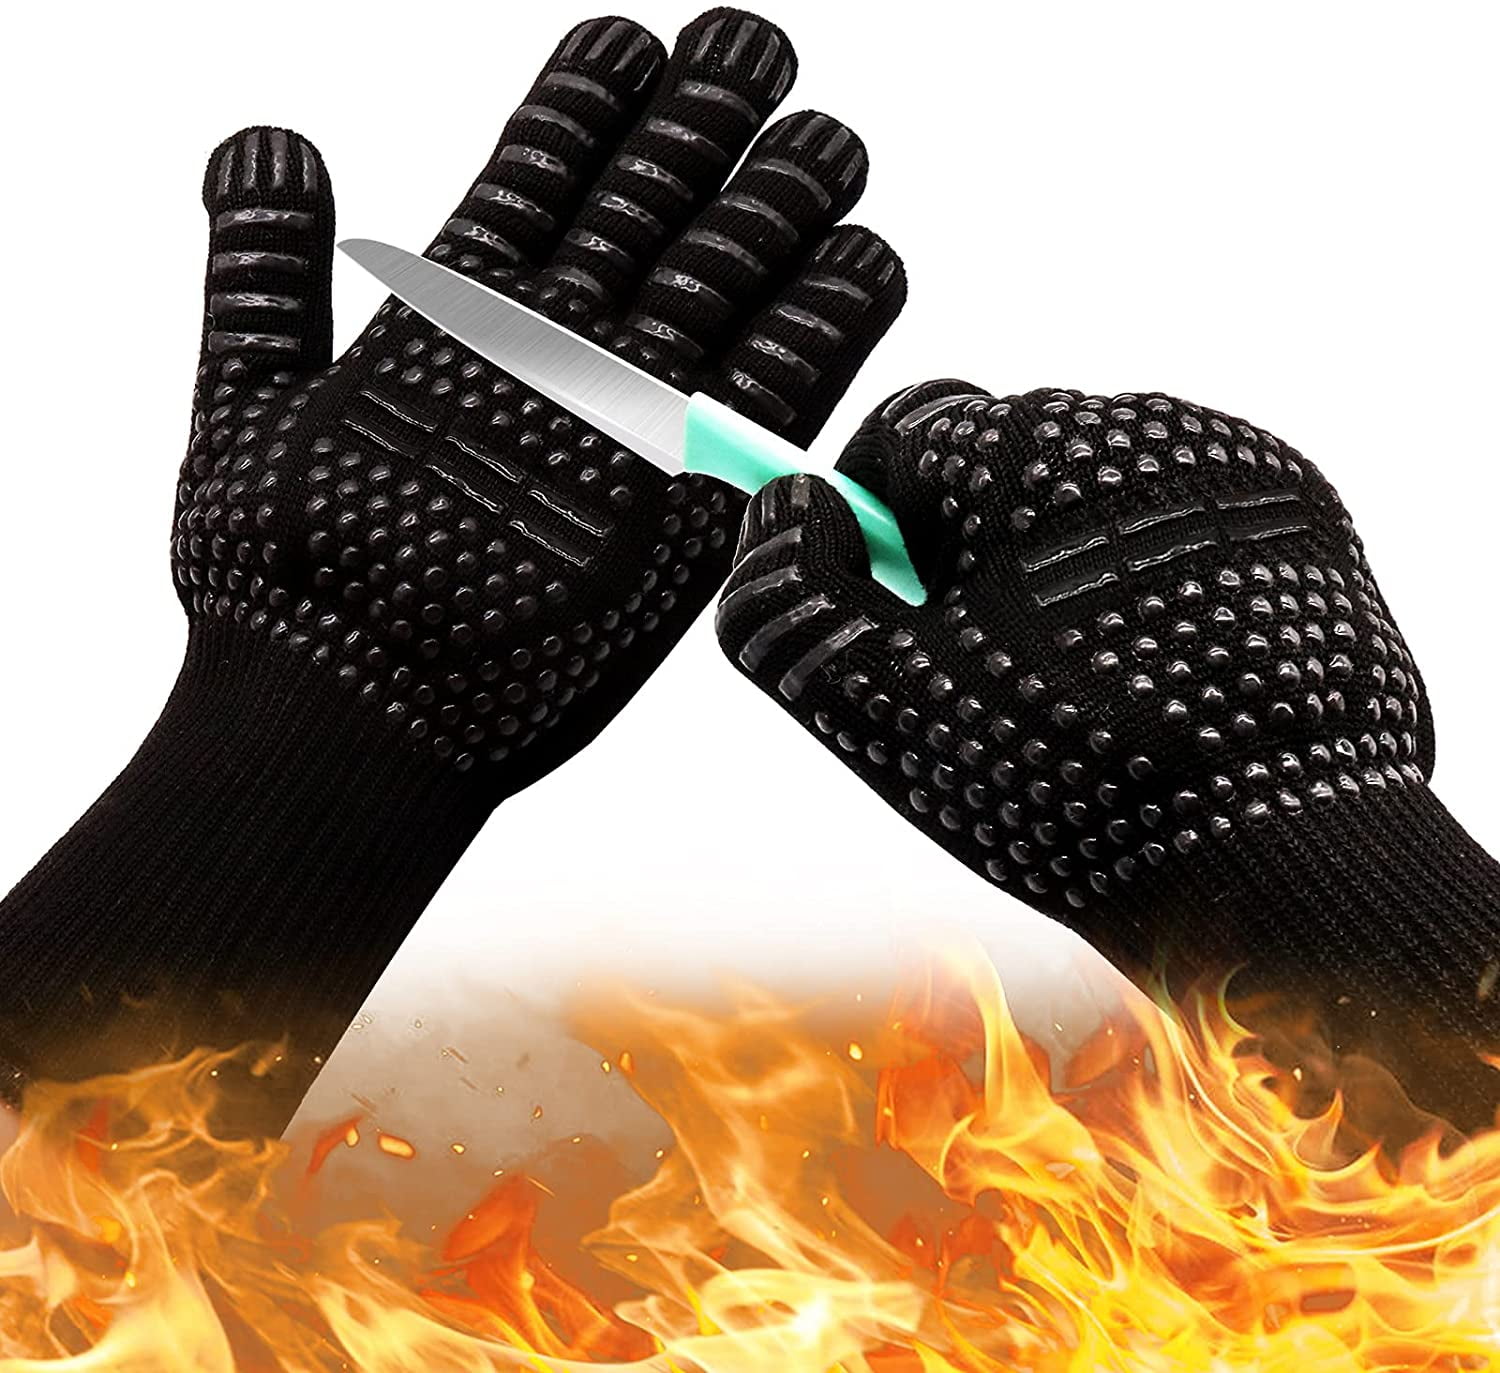 Barbecue Grill Cooking Oven 932°F Heat Resistant Extra Long Cuff Oven Gloves 